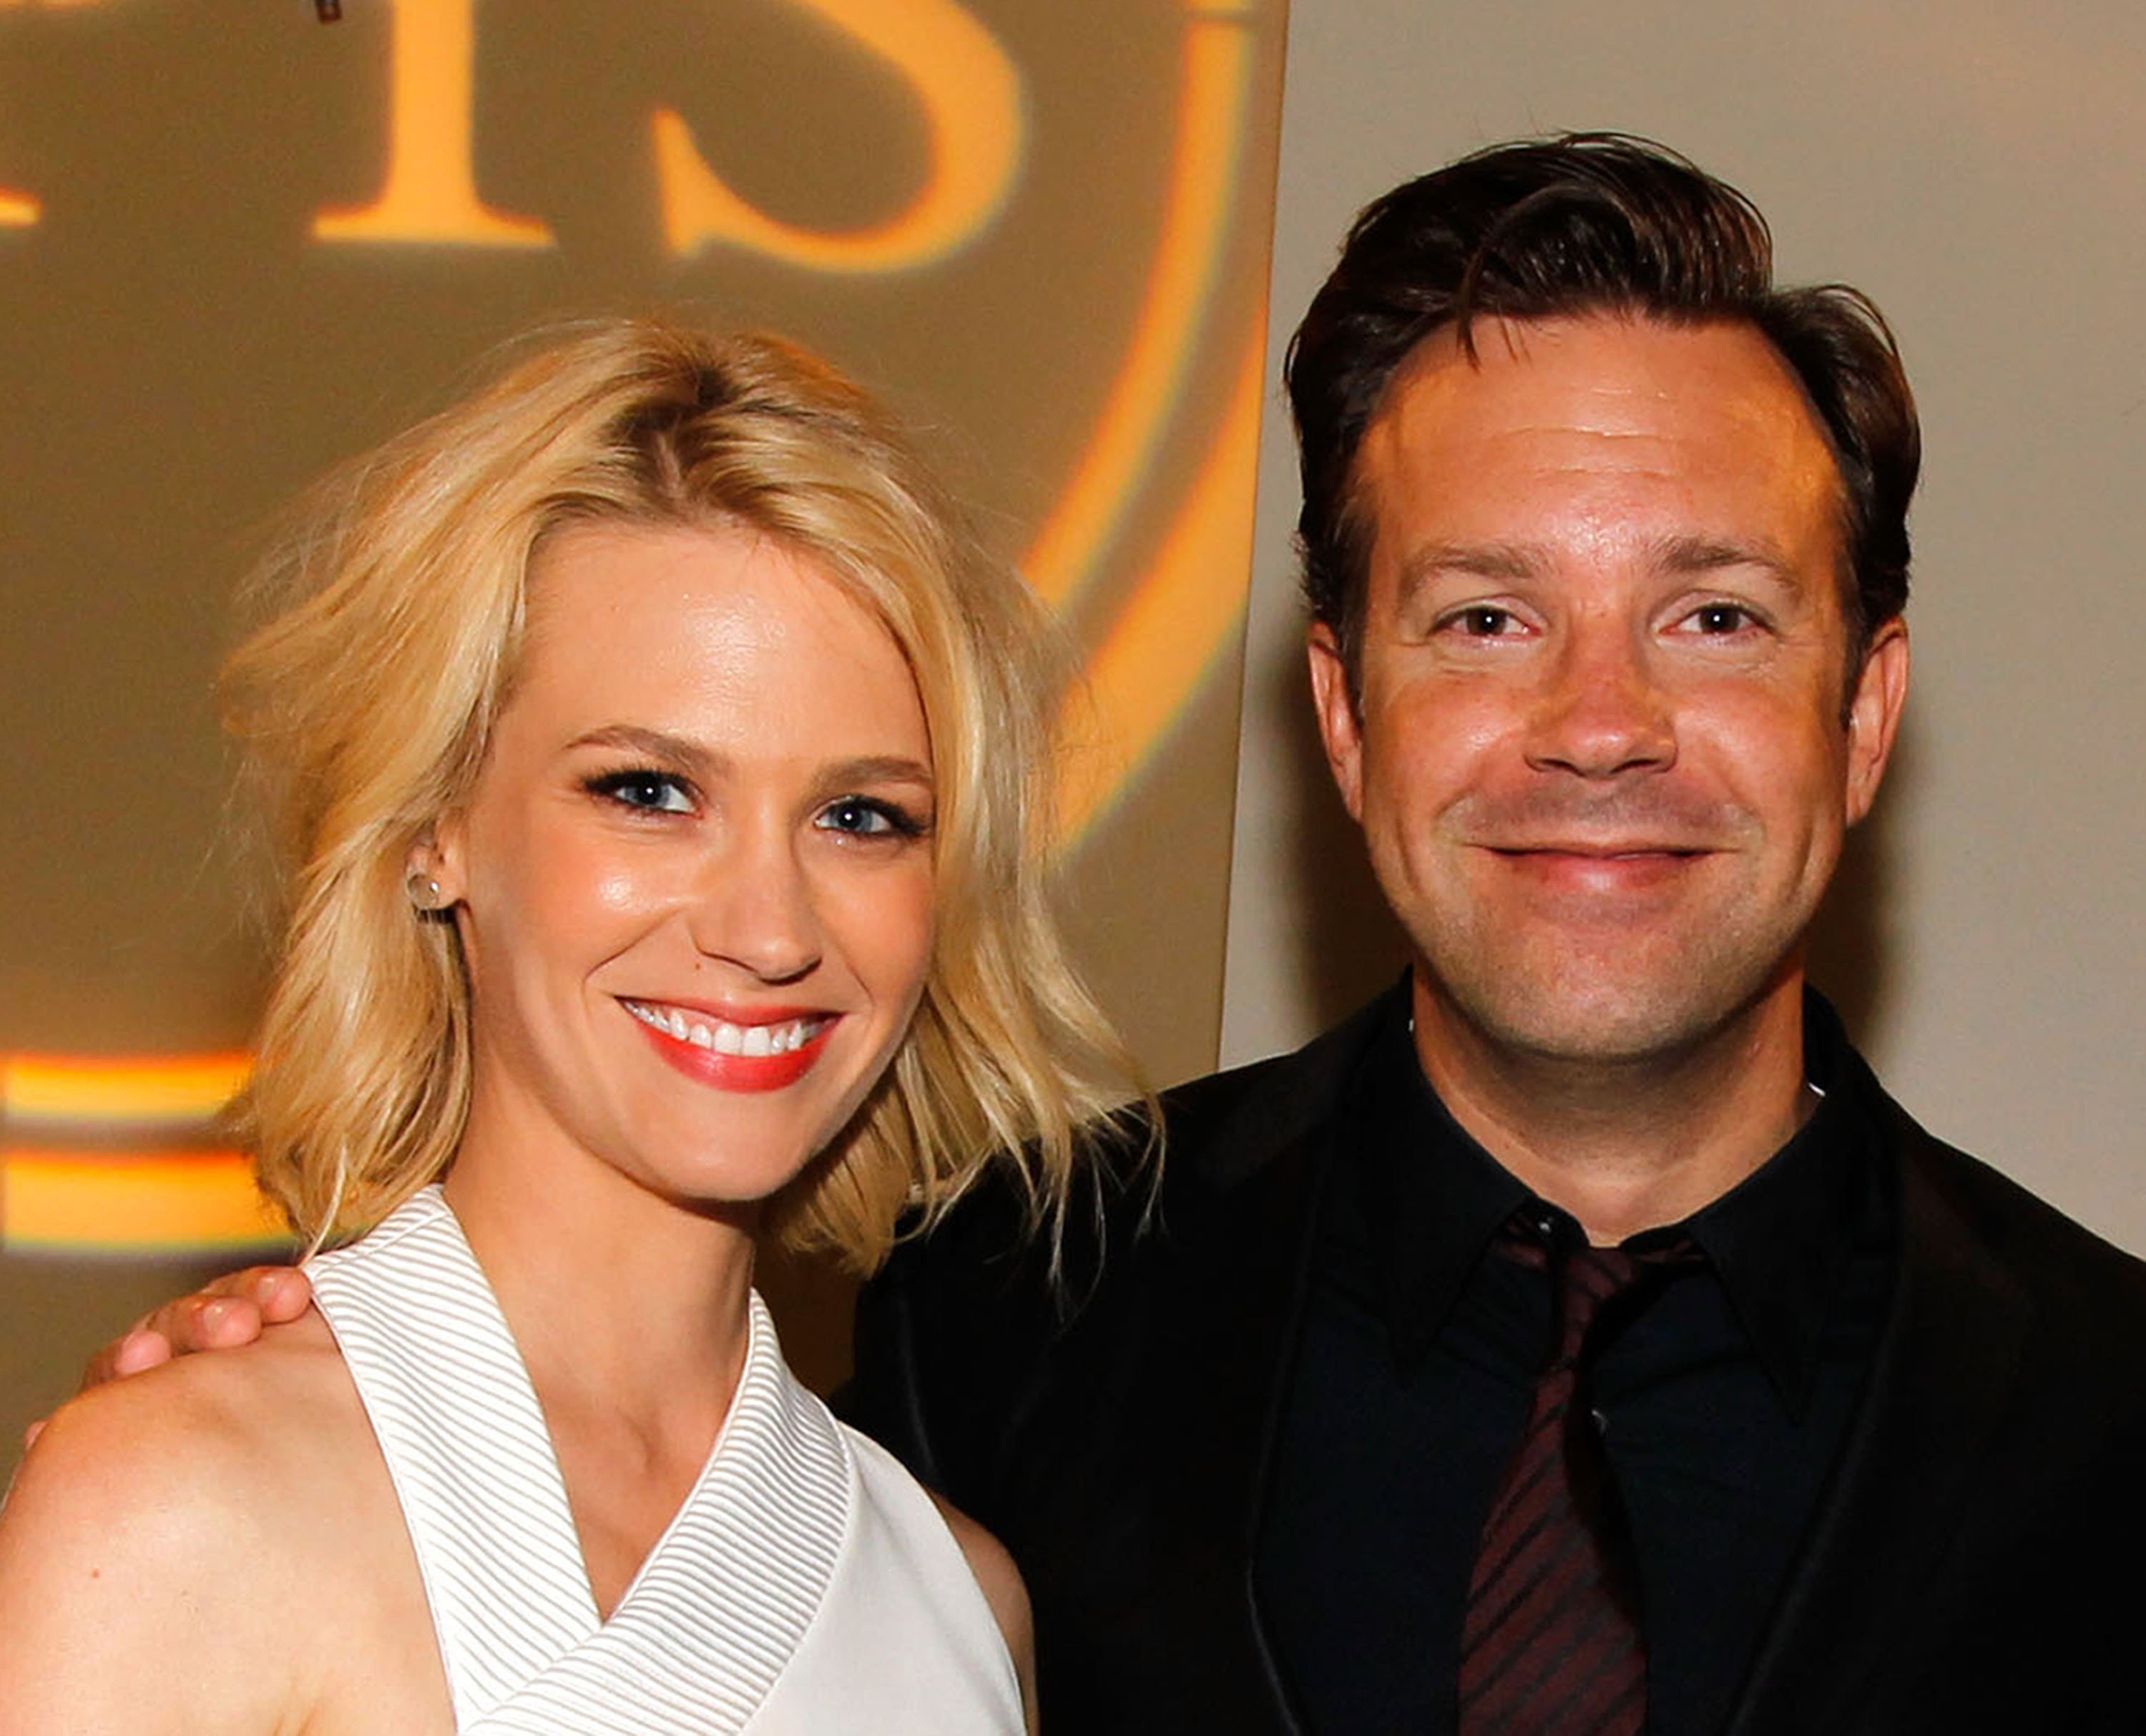 January Jones and Jason Sudeikis at the 2010 ESPY Awards in Los Angeles on July 14, 2010 | Source: Getty Images